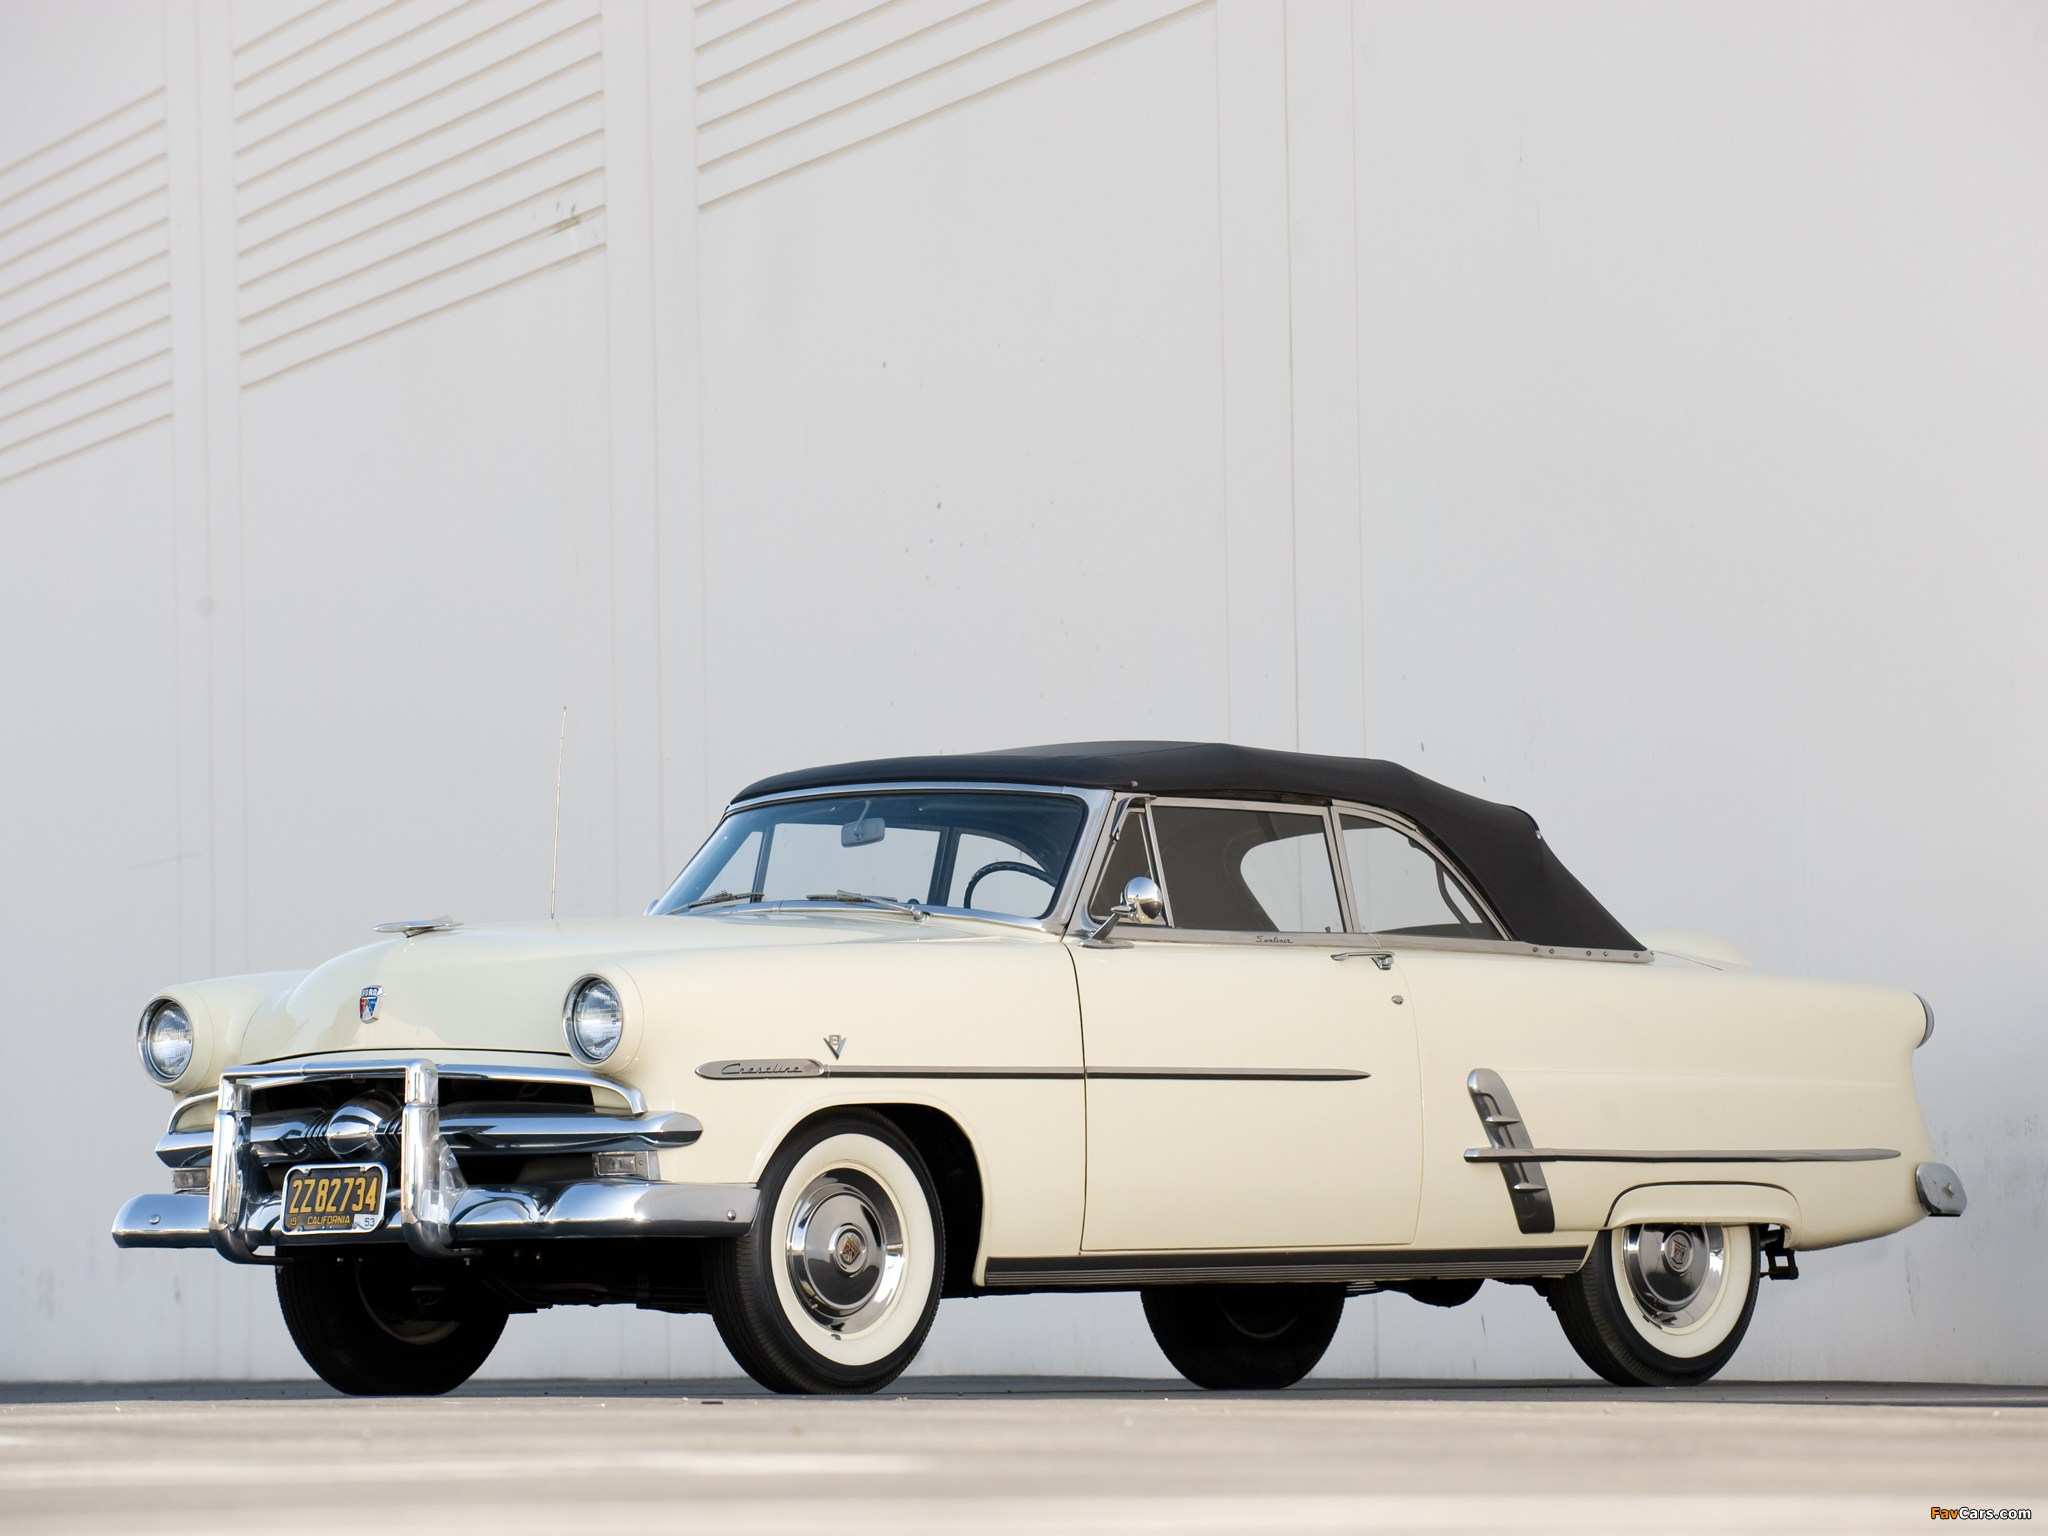 1953 Ford Crestline Sunliner Convertible Backgrounds, Compatible - PC, Mobile, Gadgets| 2048x1536 px